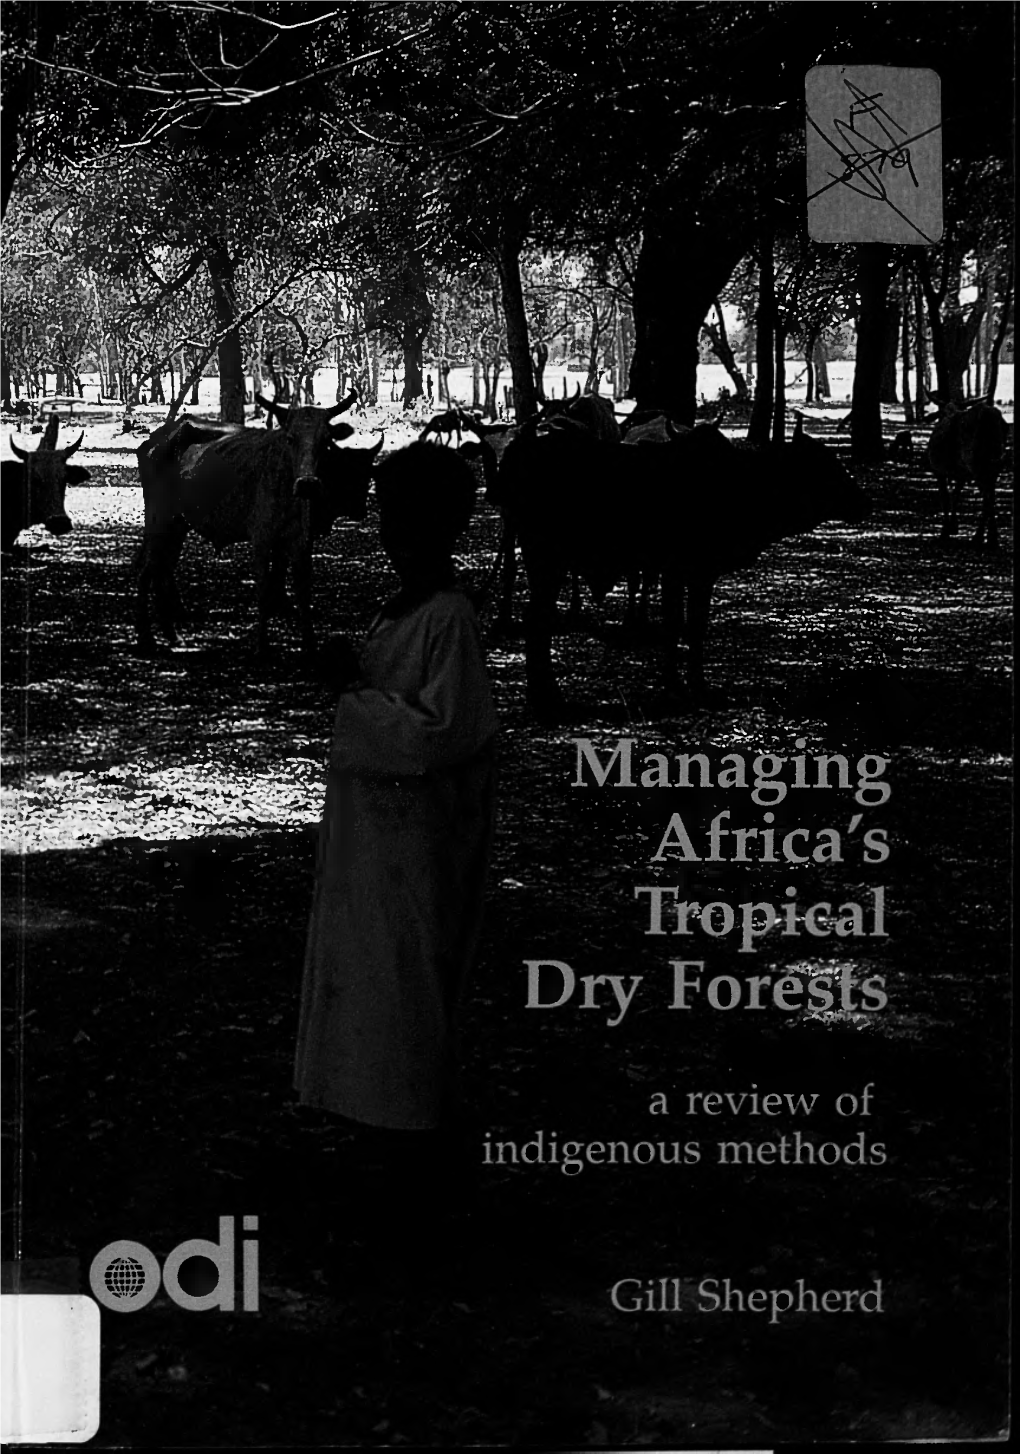 Managing Africa's Tropical Dry Forests: a Review of Indigenous Methods